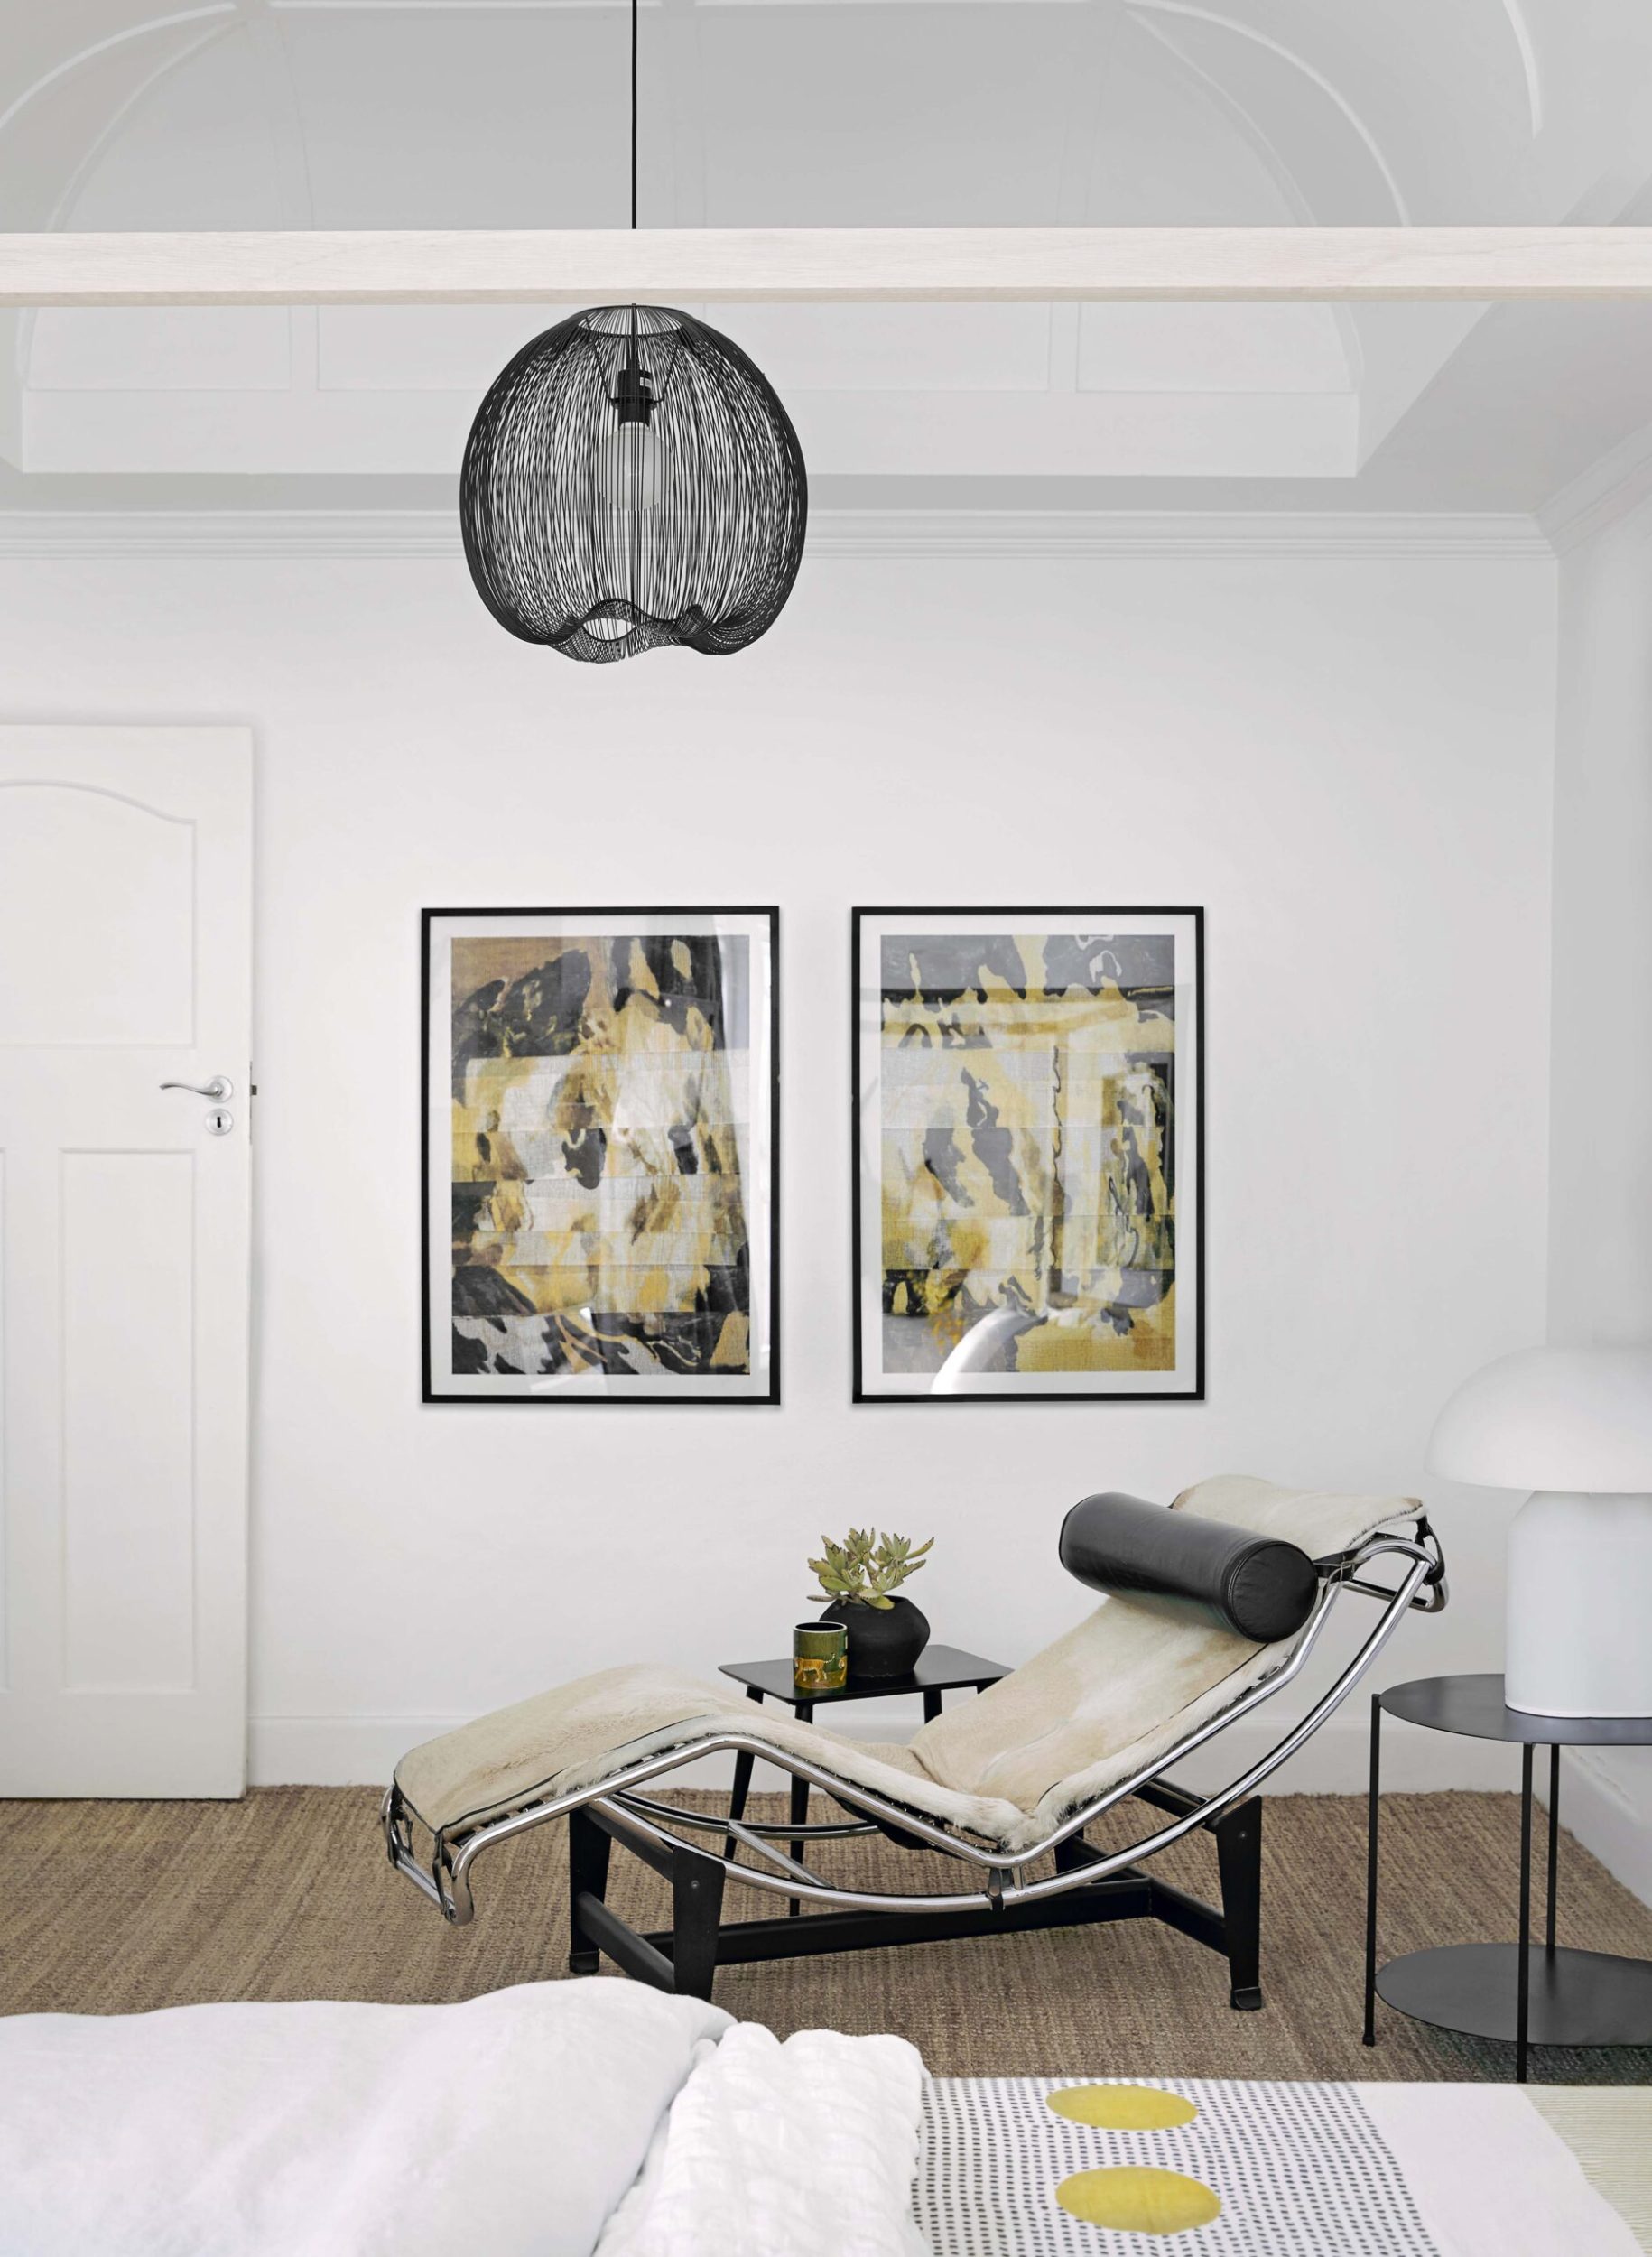 White room with wood floor, white walls, a round black lamp and two abstract artworks in black frames